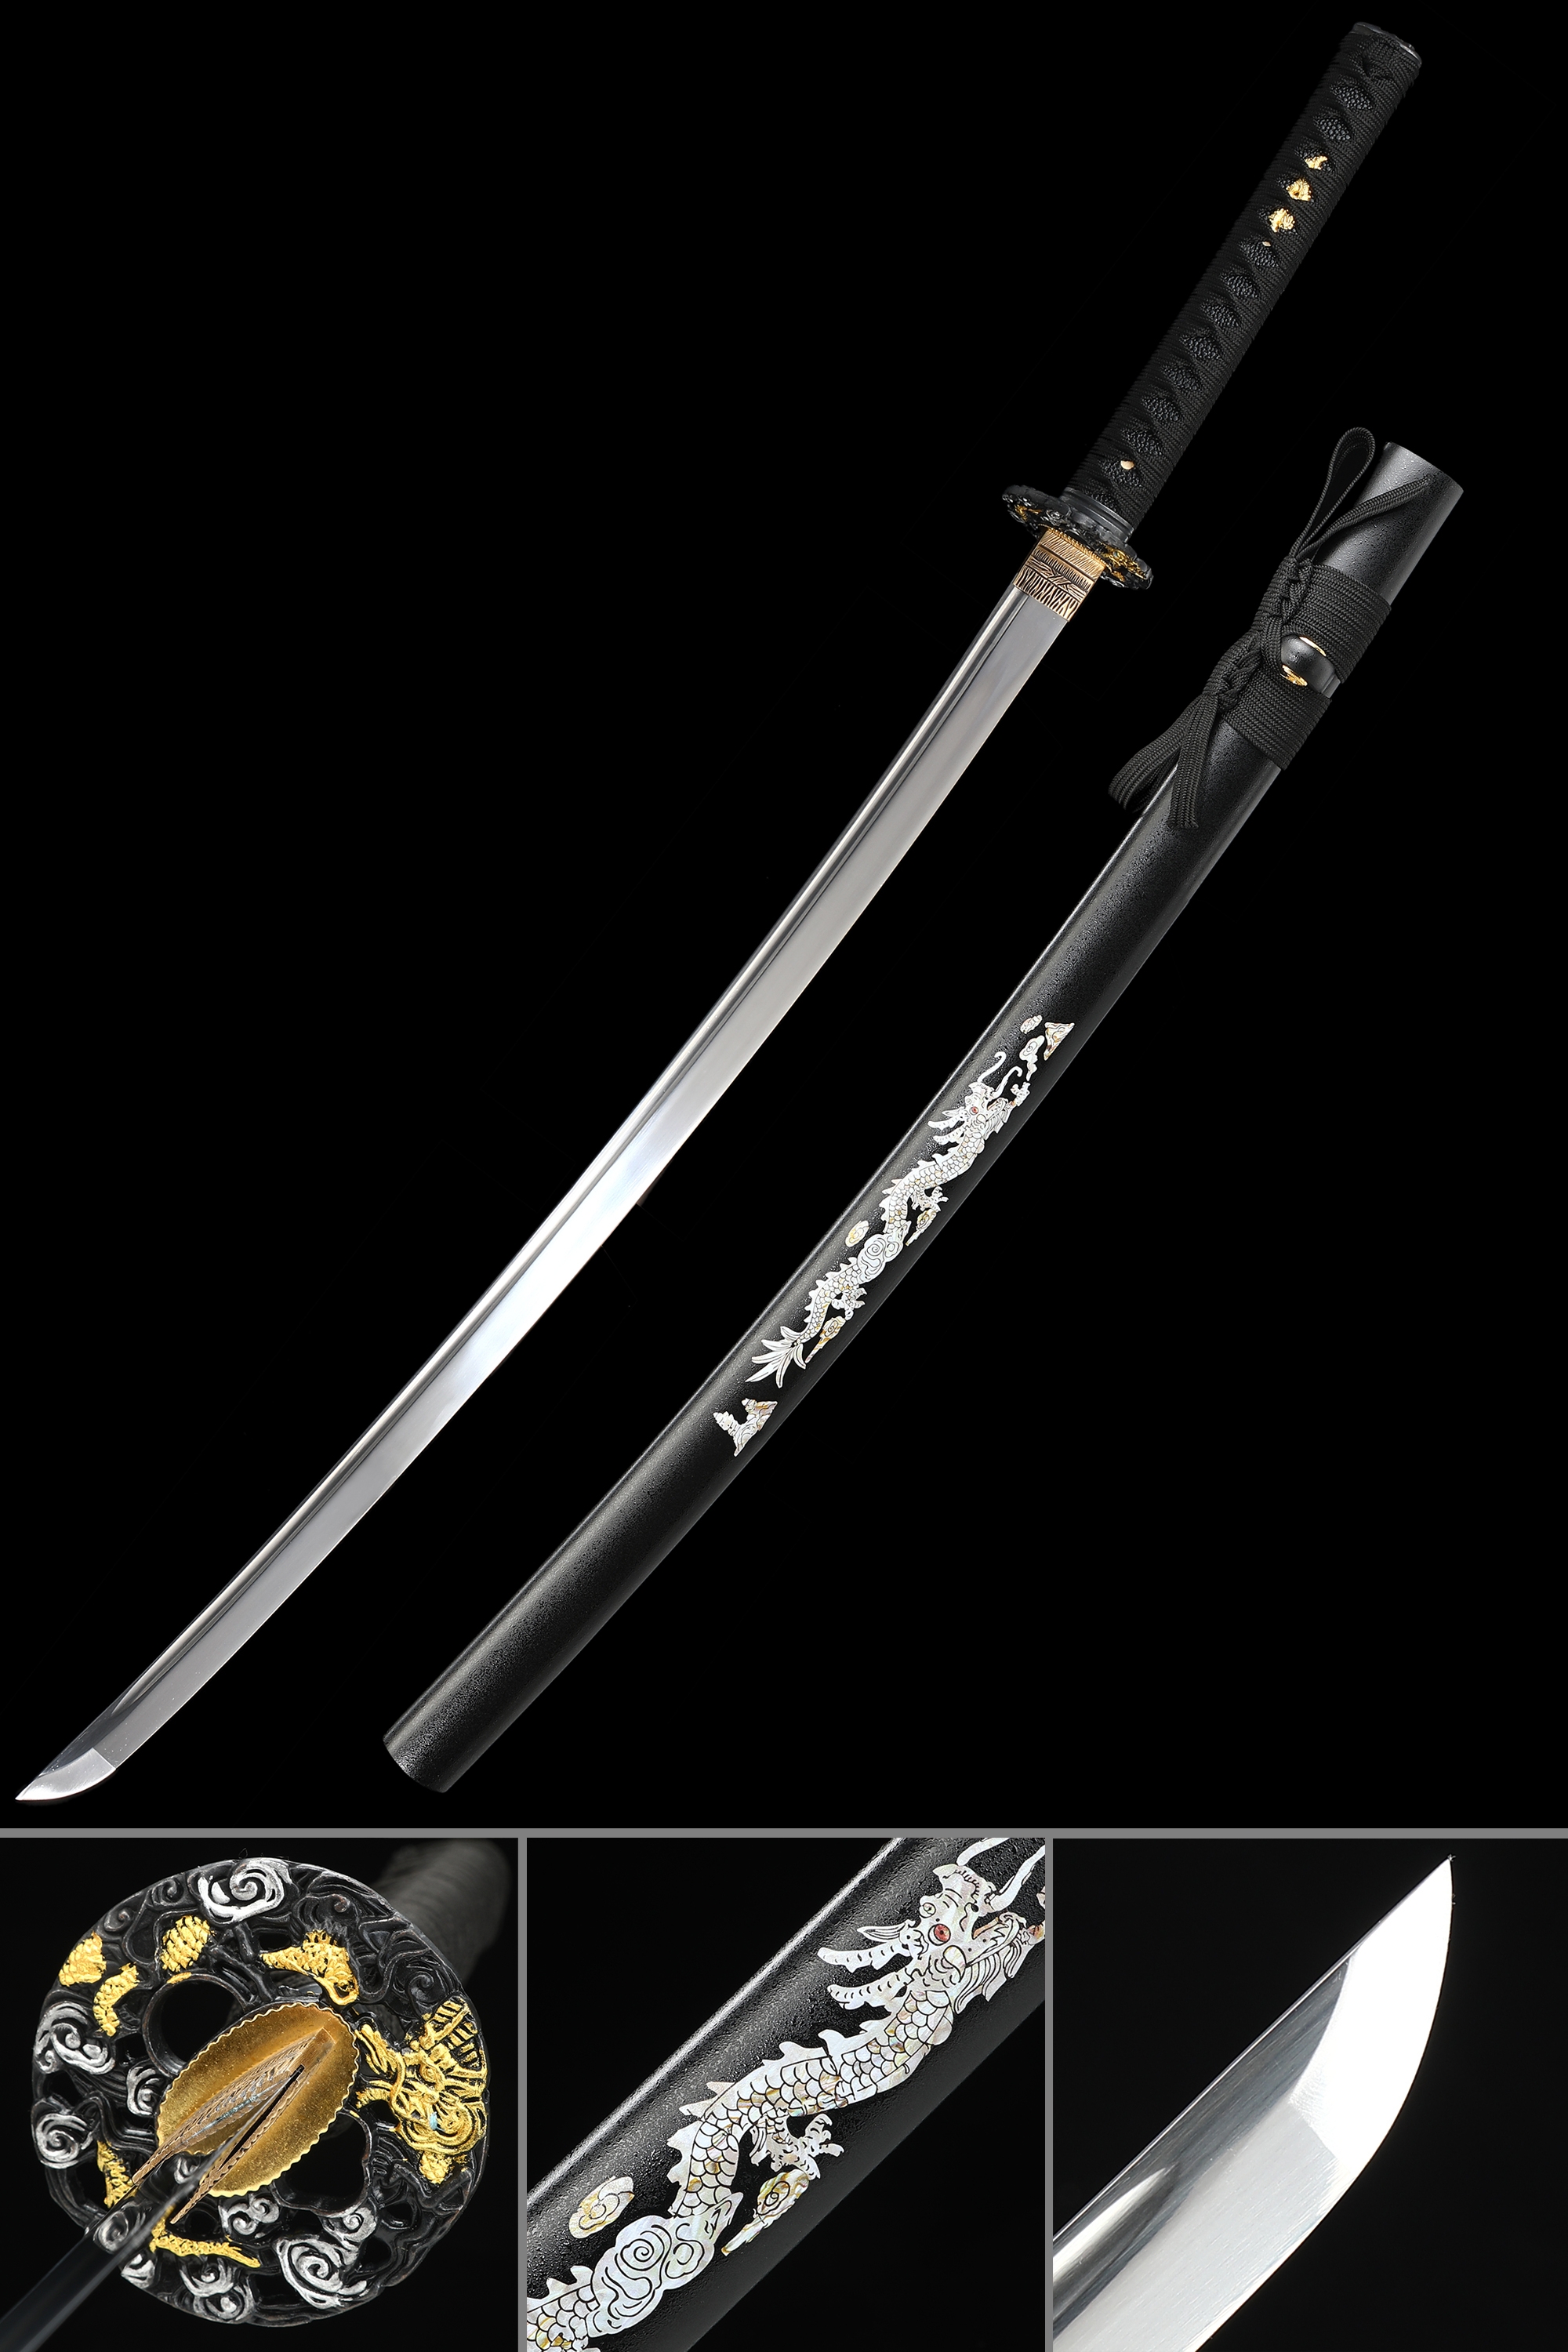 Handcrafted Full Tang Katana Sword 1095 Carbon Steel With Black Dragon Theme Scabbard